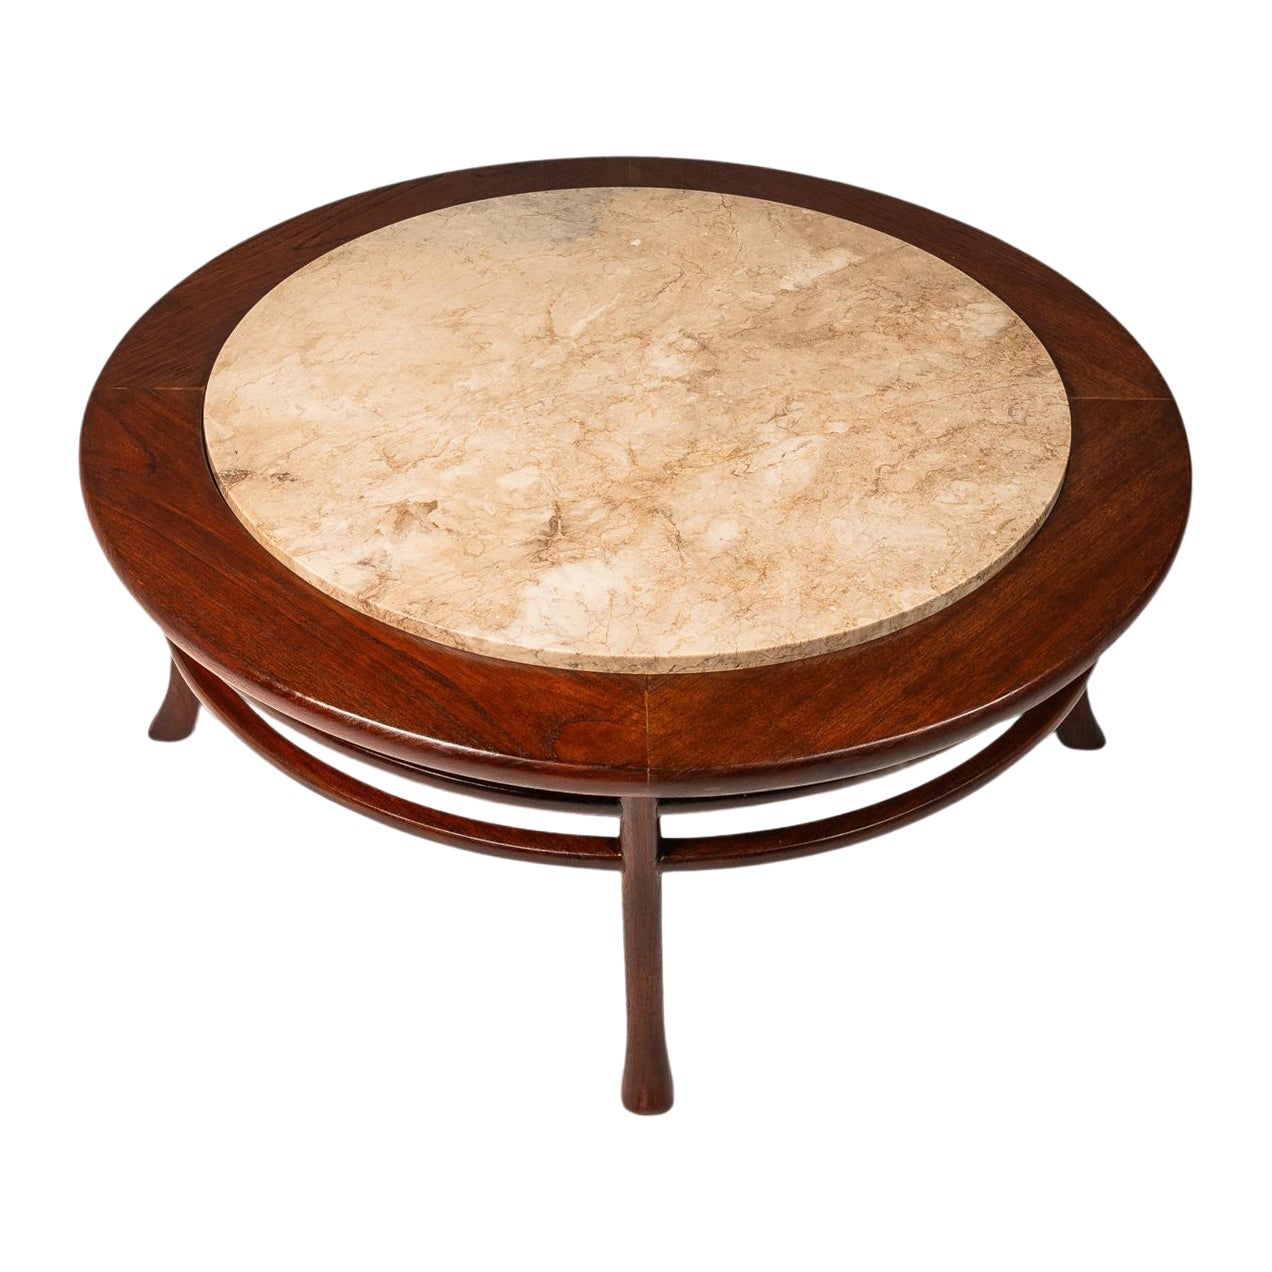 Walnut Coffee Table w/ Travertine Top Attributed to T.H. Robsjohn Gibbings, 1950 For Sale